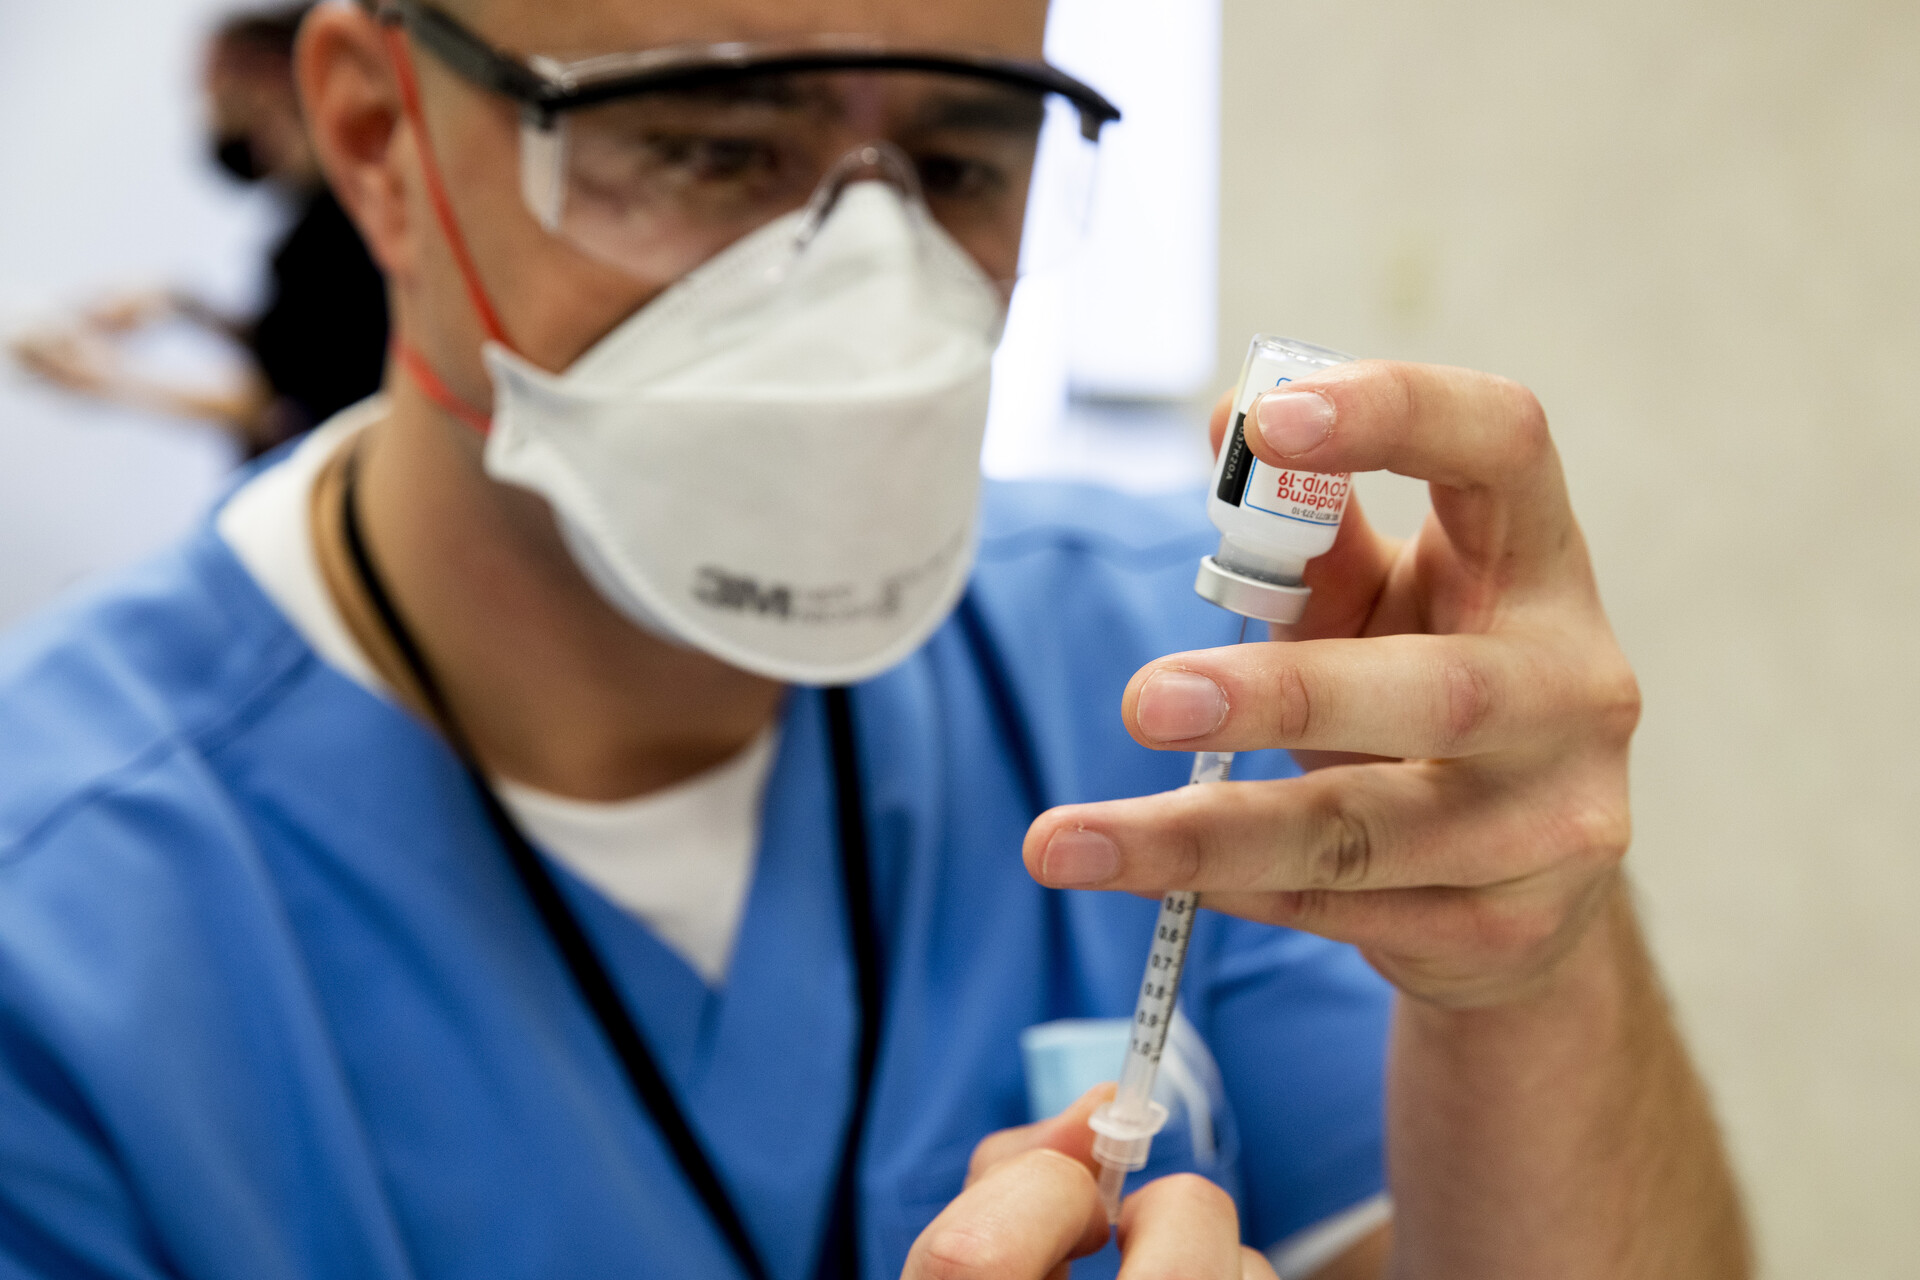 A health care worker wearing blue scrubs and a white face mask holds a vial of COVID vaccine.